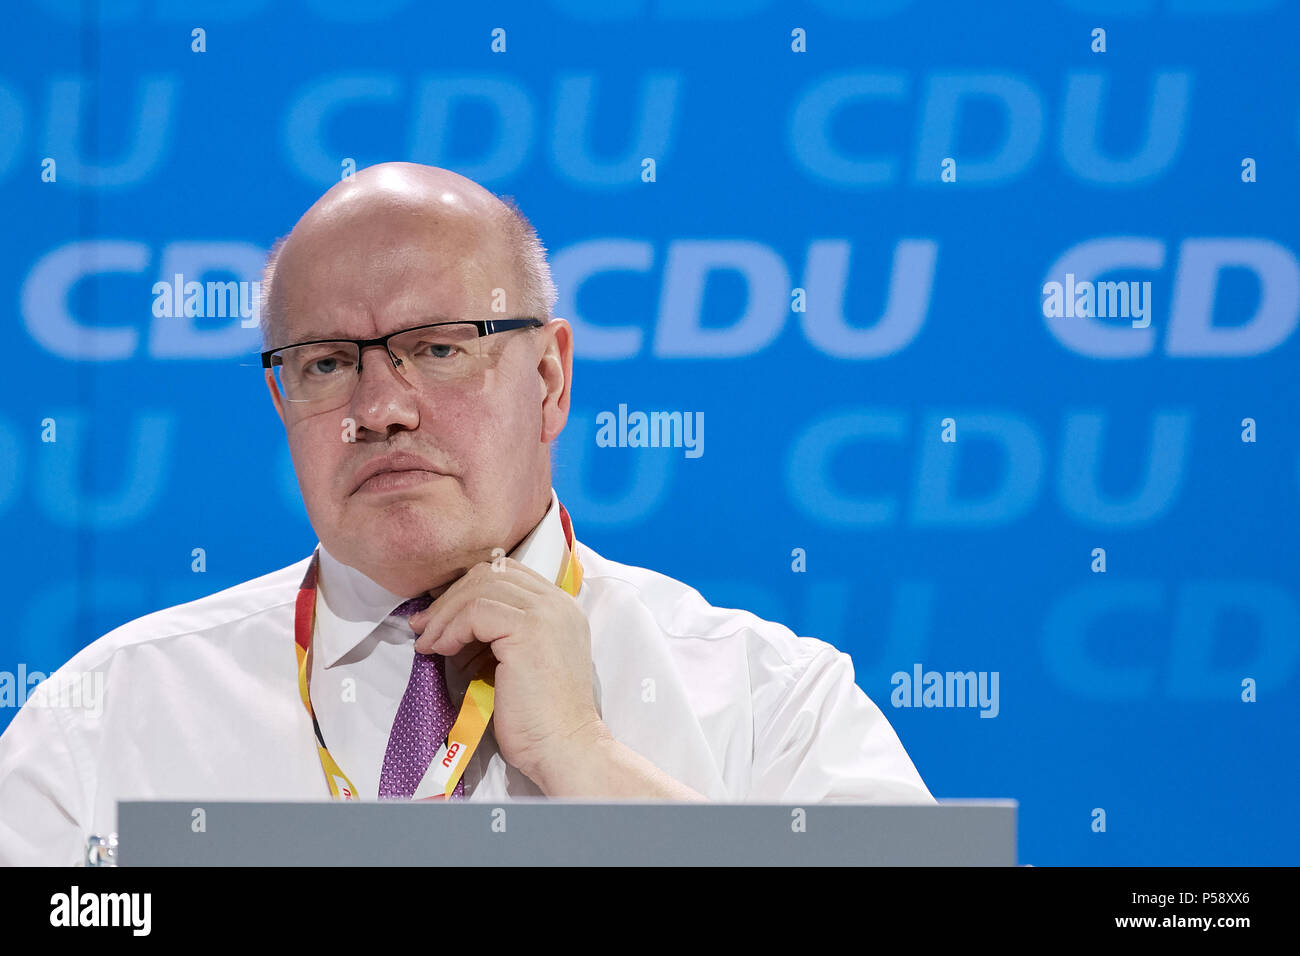 Berlin, Germany - Peter Altmaier at the 30th Federal Party Congress of the CDU. Stock Photo